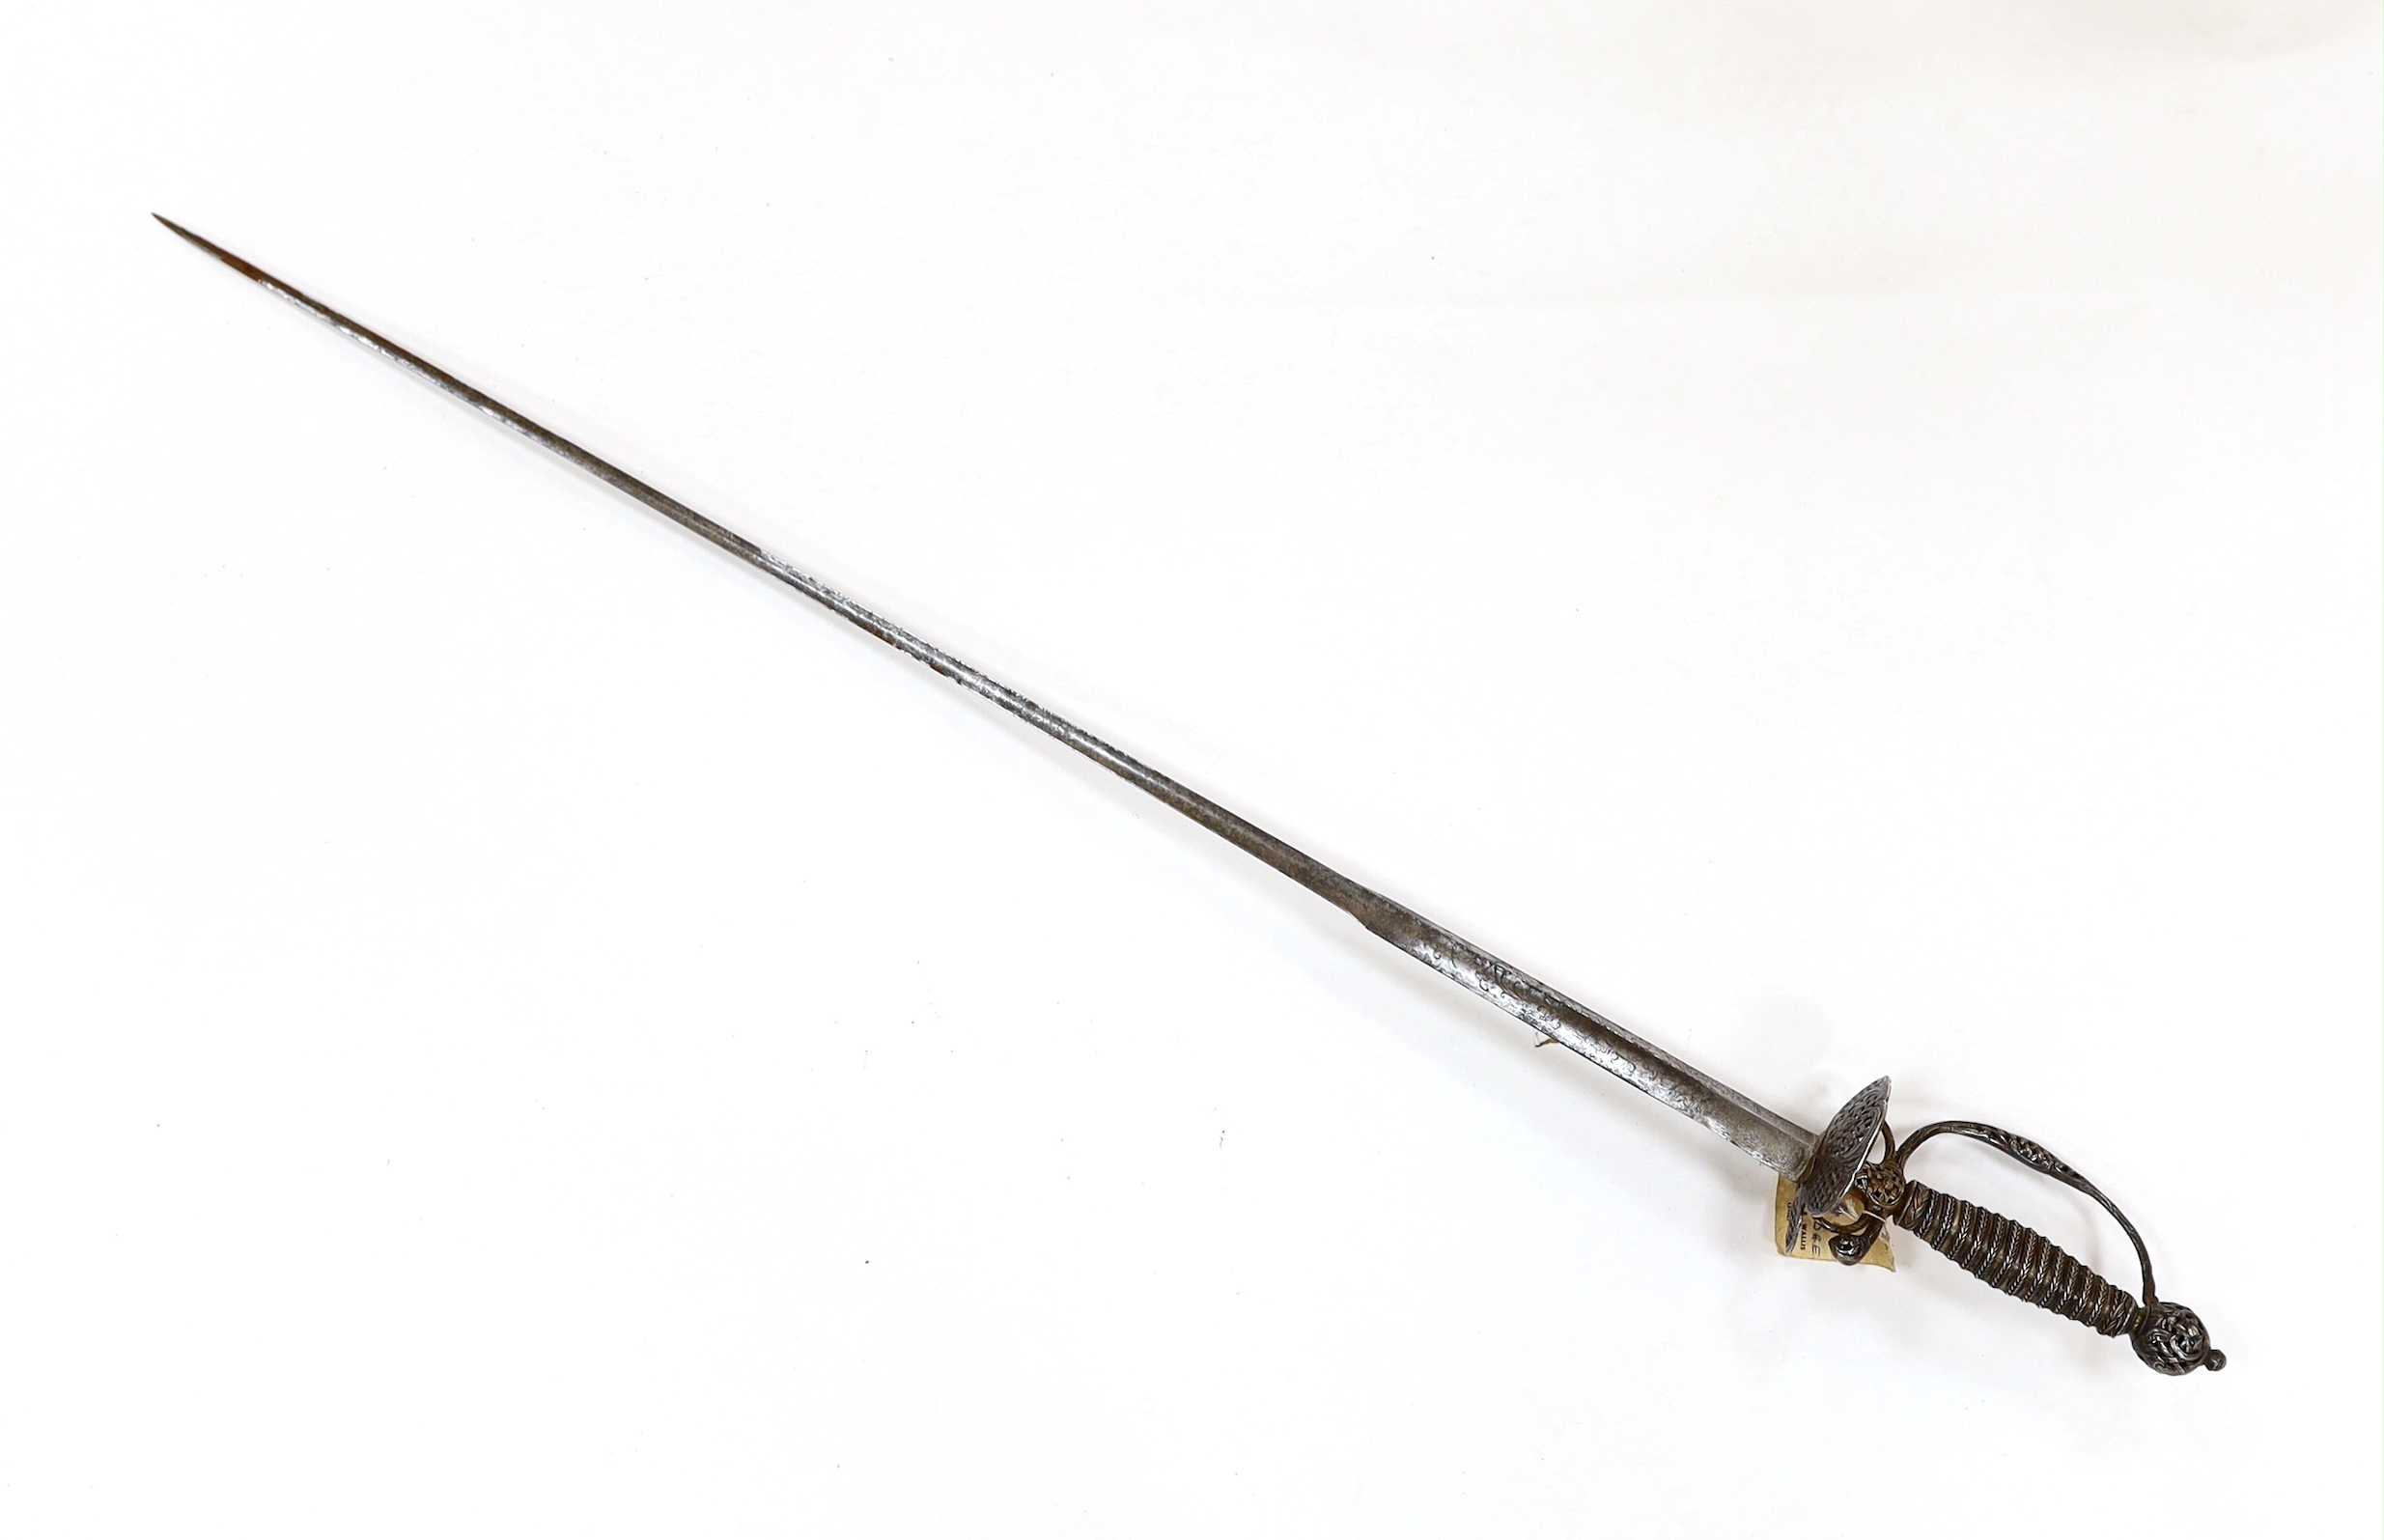 A French silver hilted small sword, c.1770, the ricasso rings have two tiny marks struck on the end which possibly could be Paris discharge marks, the hilt pierced with basketweave decoration and flowers, silver wire and